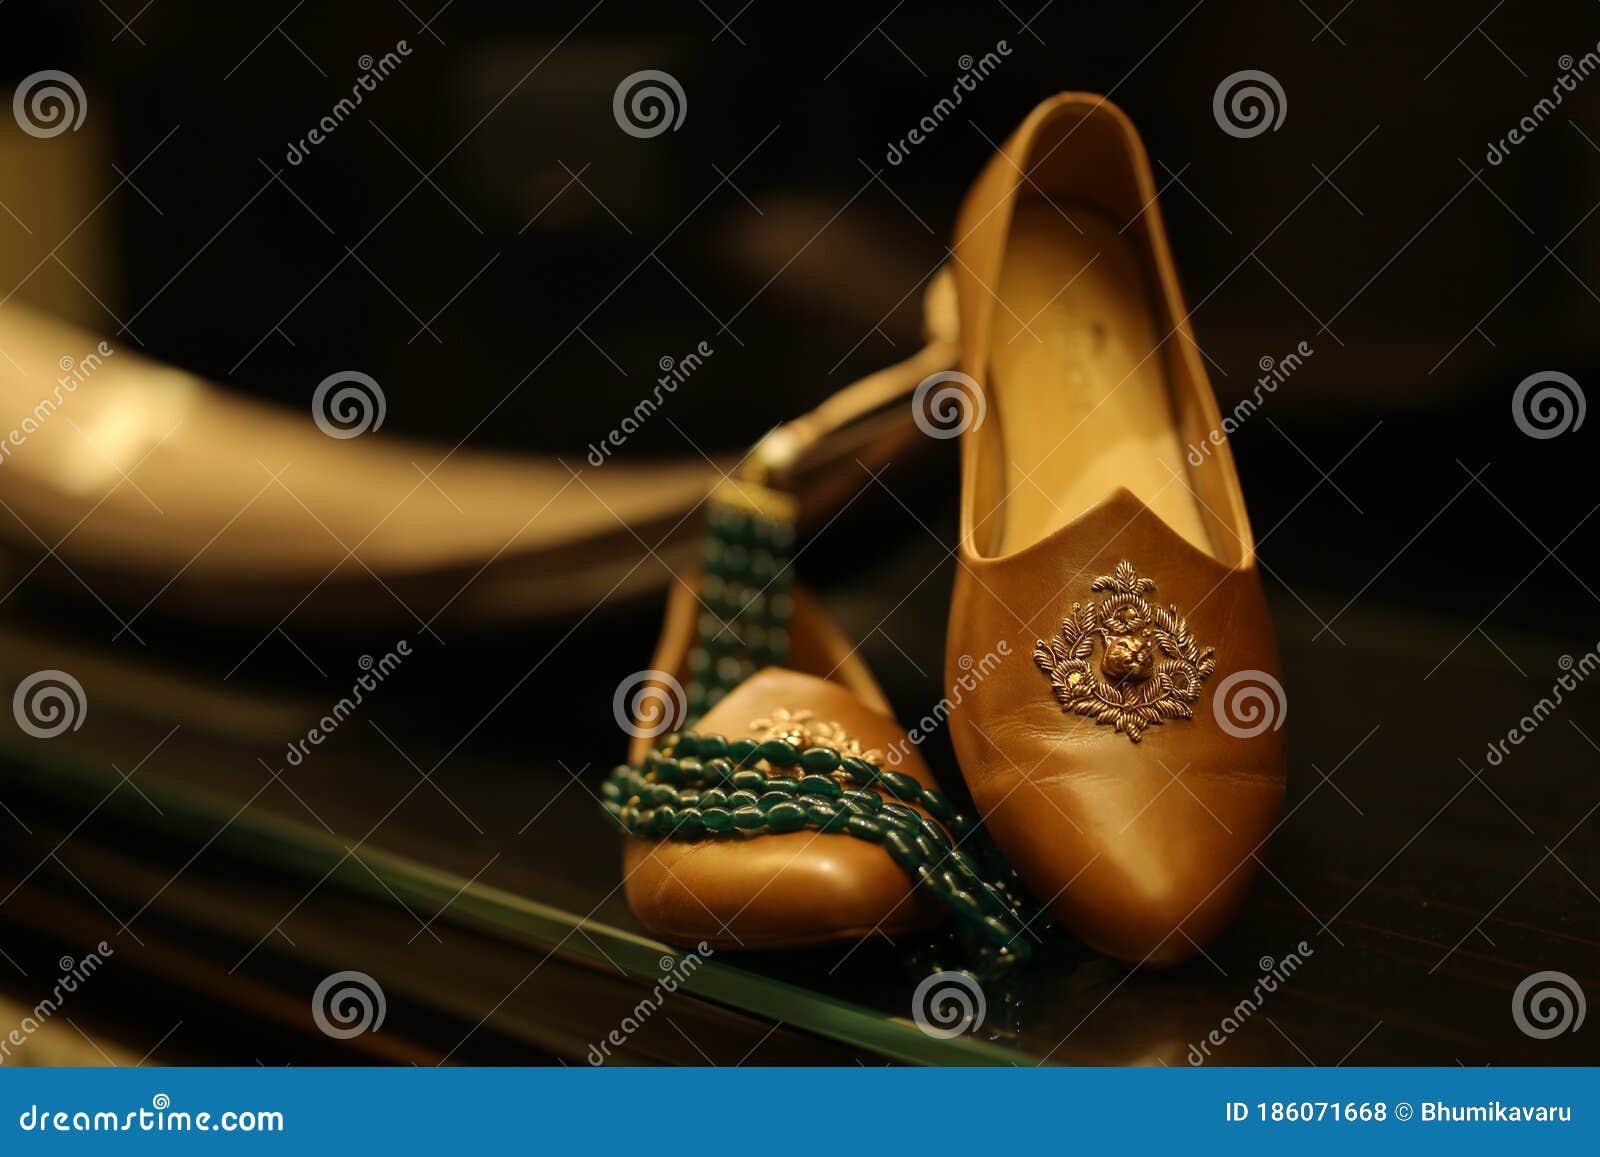 vendor-cover | Indian wedding shoes, Indian shoes, Jutti